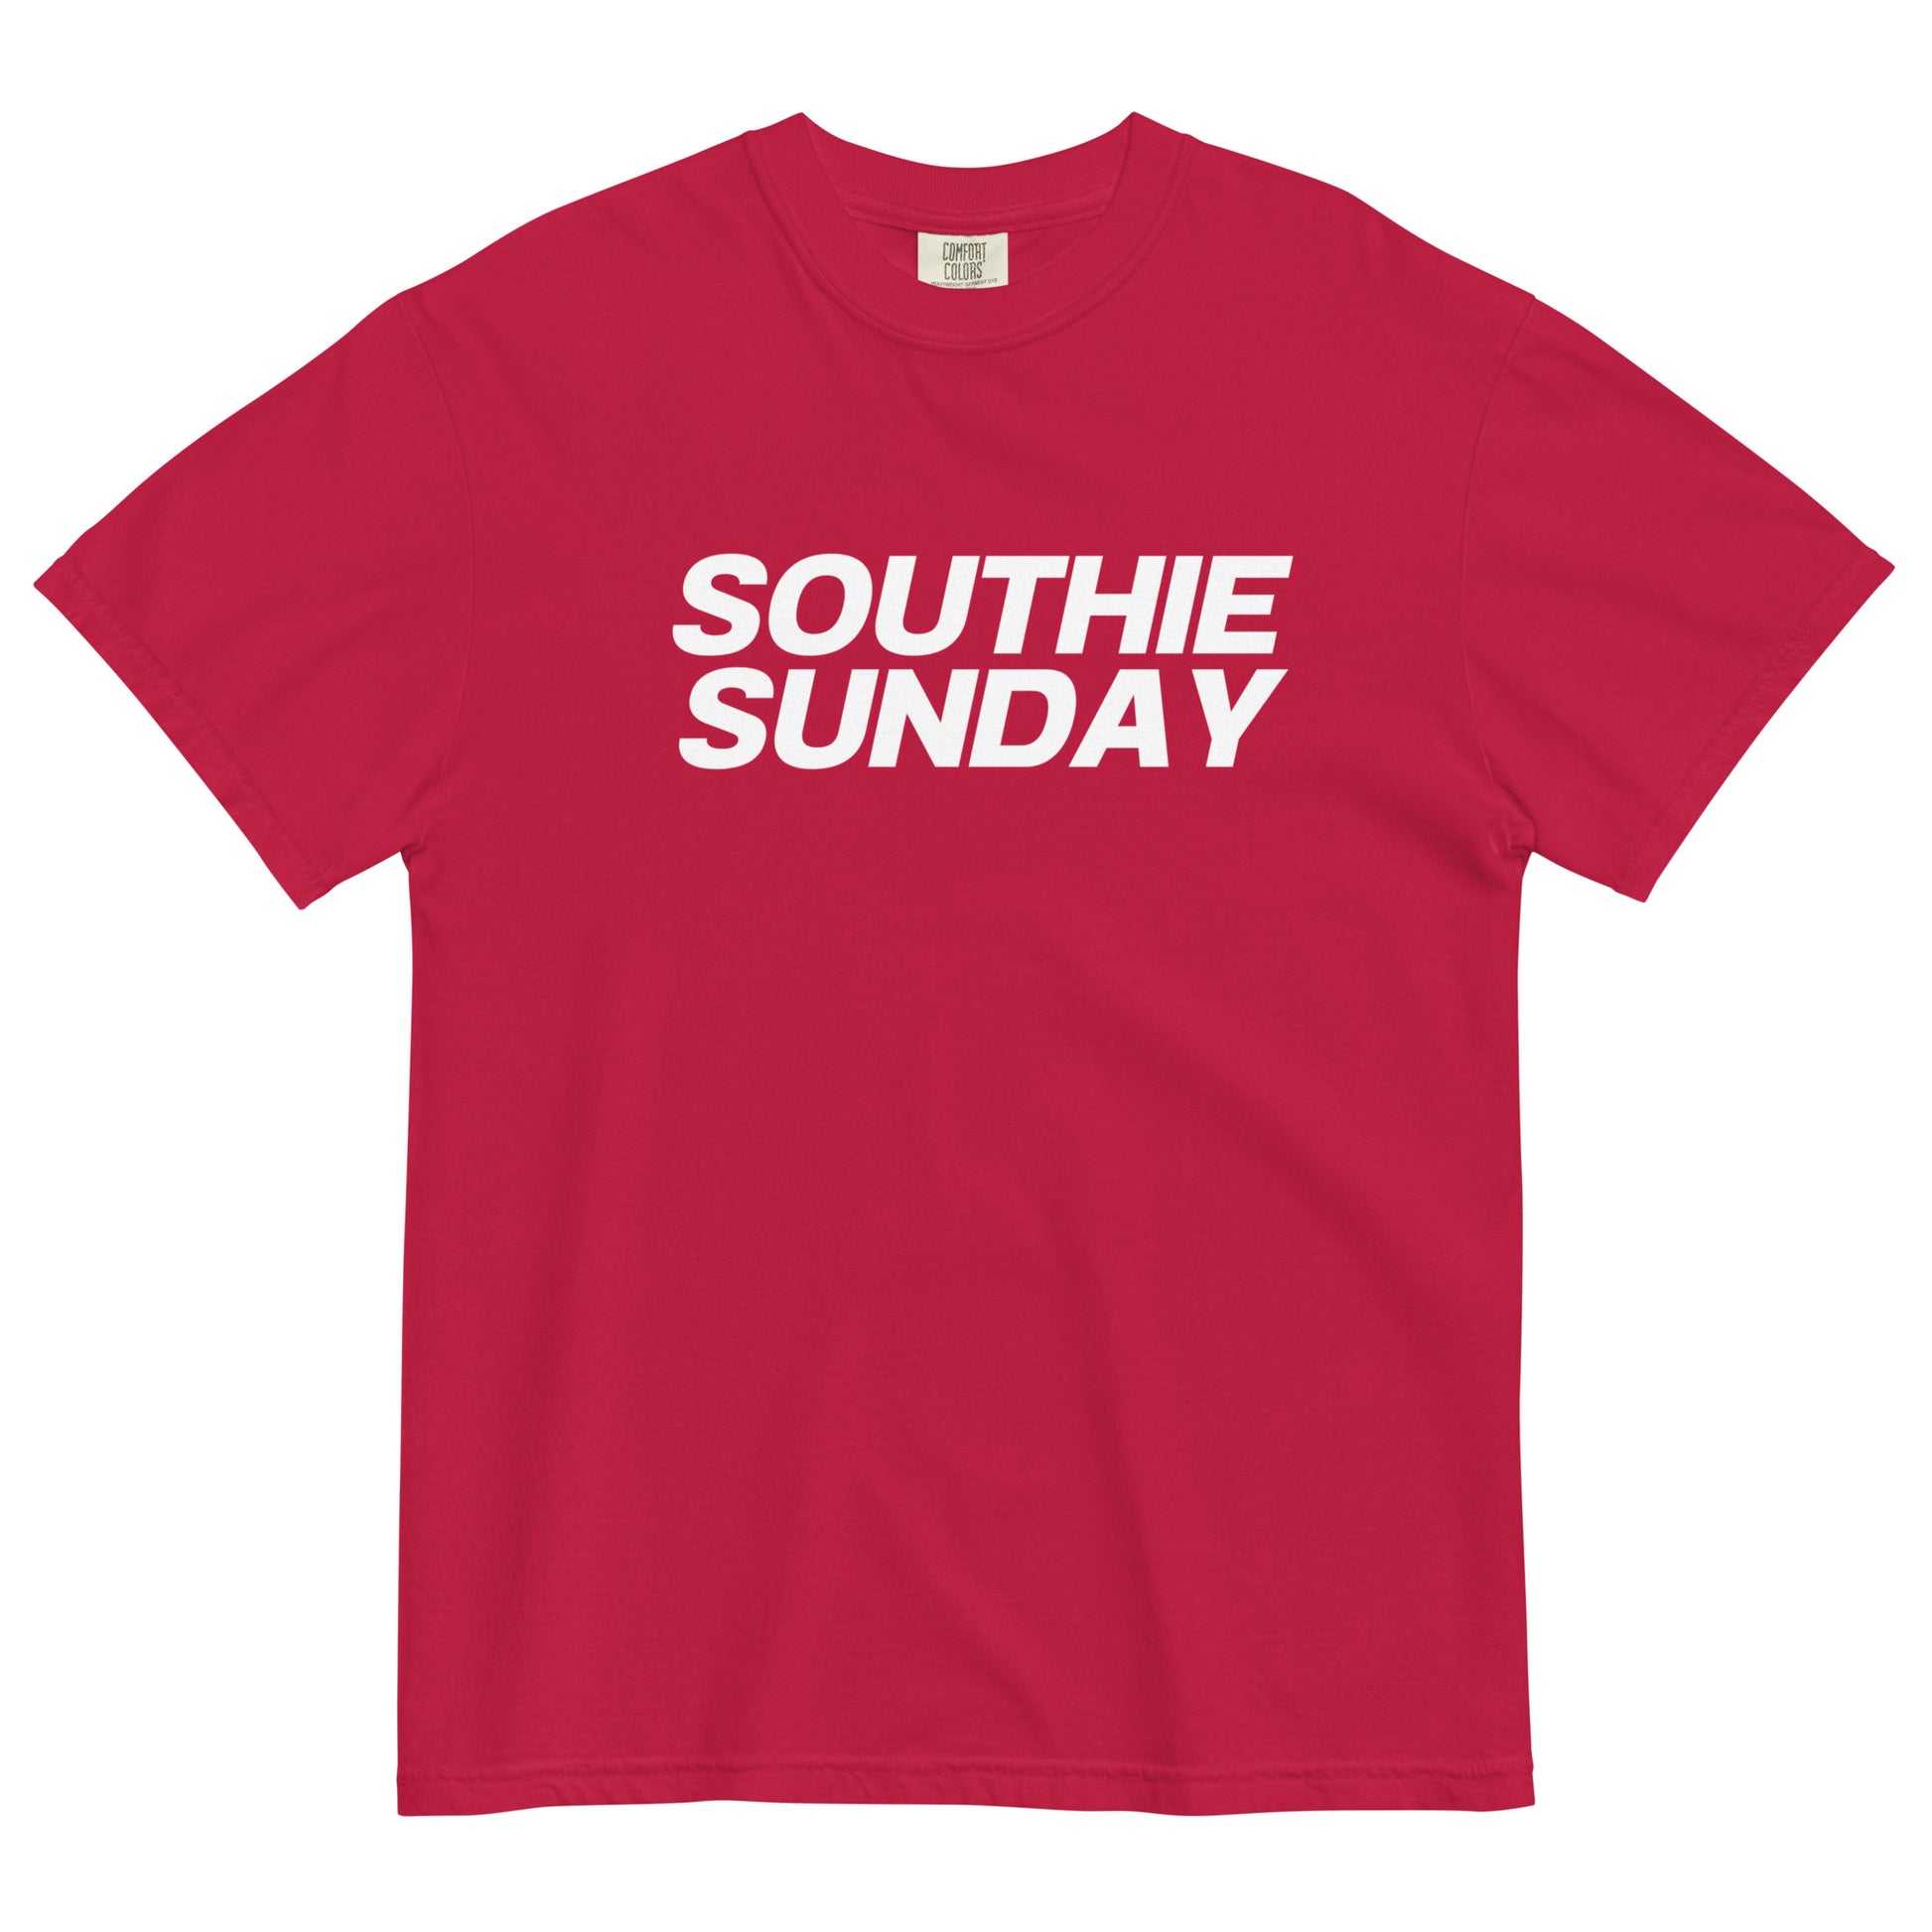 red tshirt that says "southie sunday" in white lettering